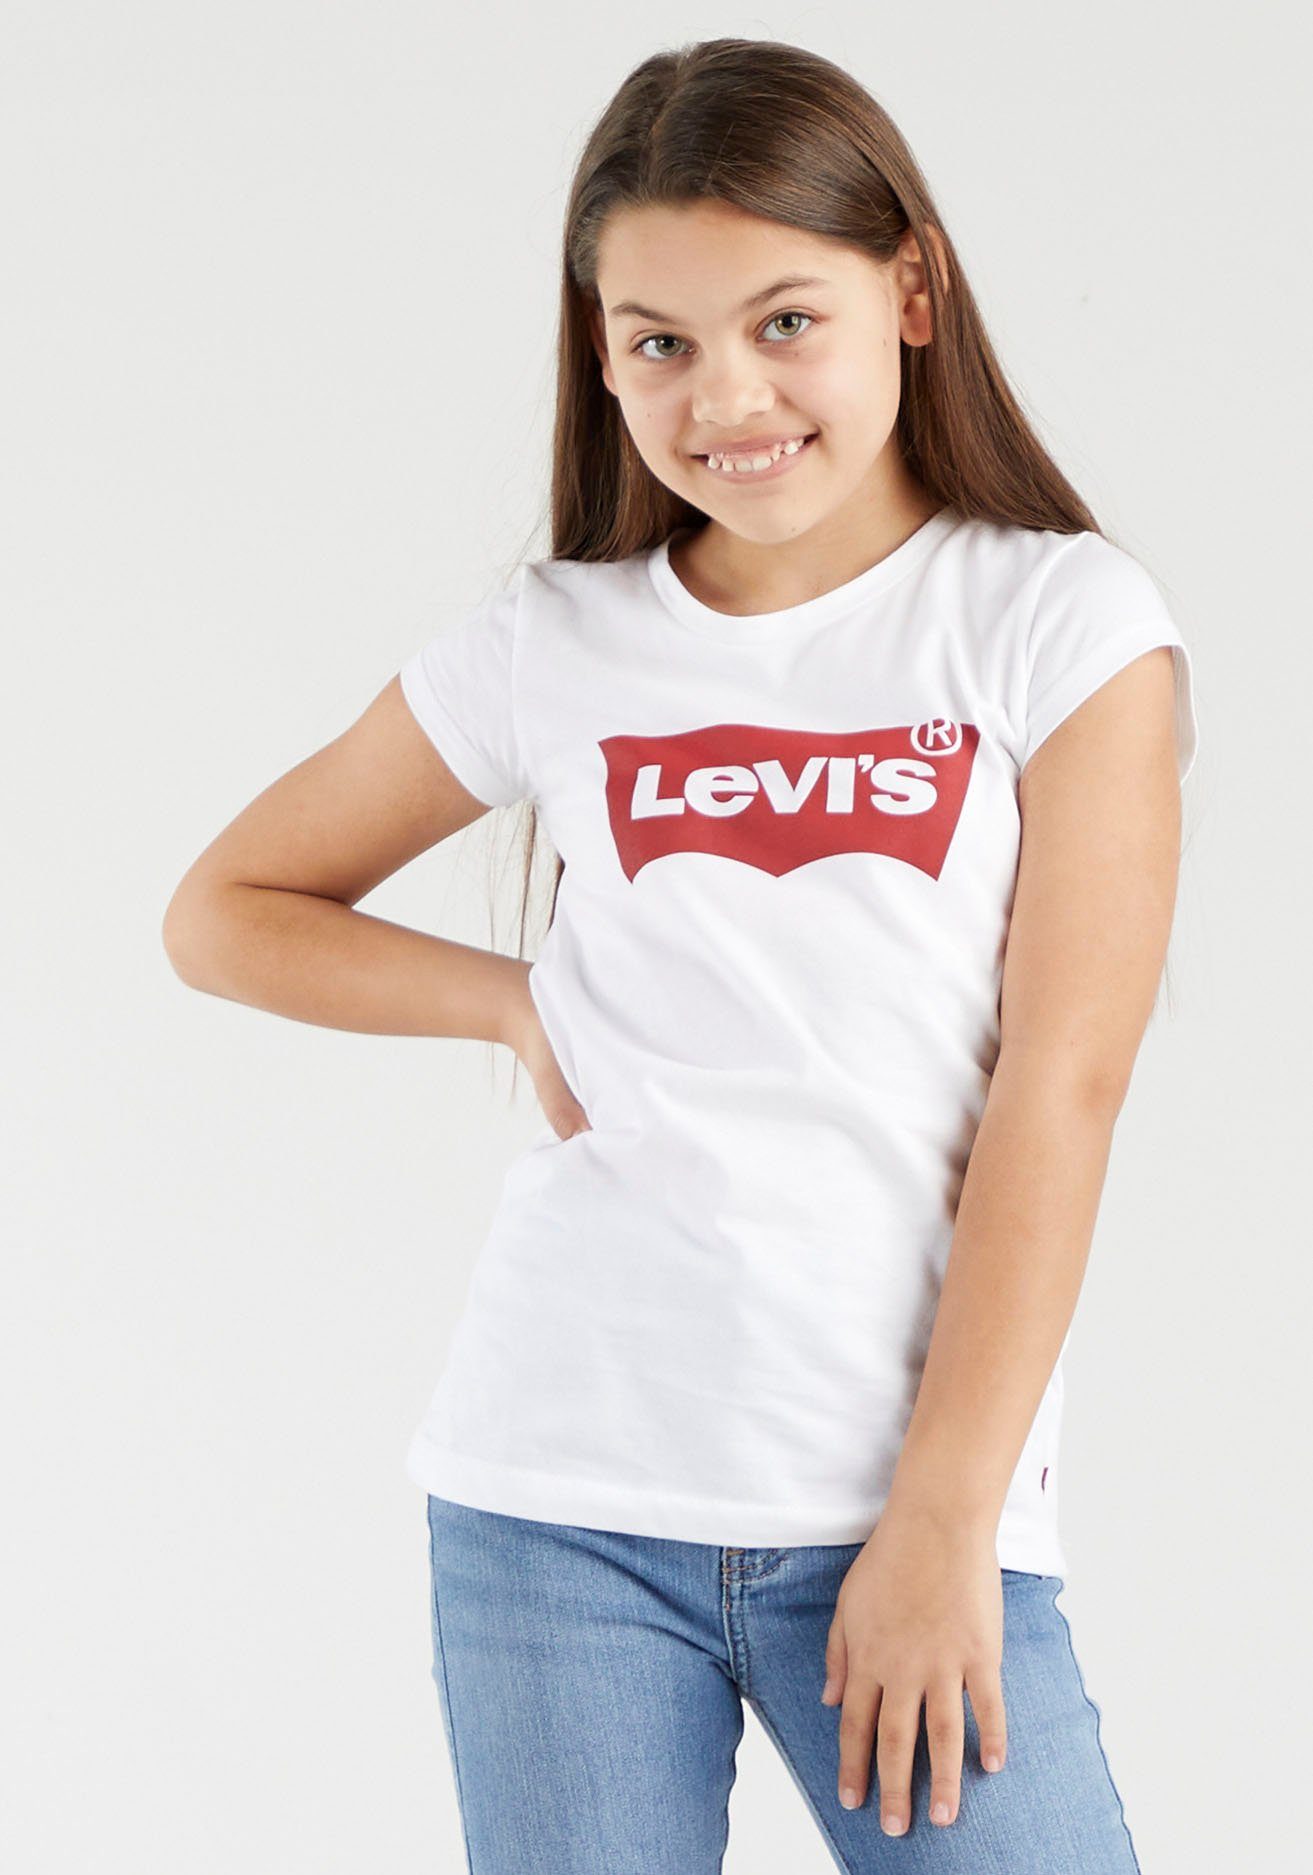 for T-Shirt Levi's® TEE white/red GIRLS Kids BATWING